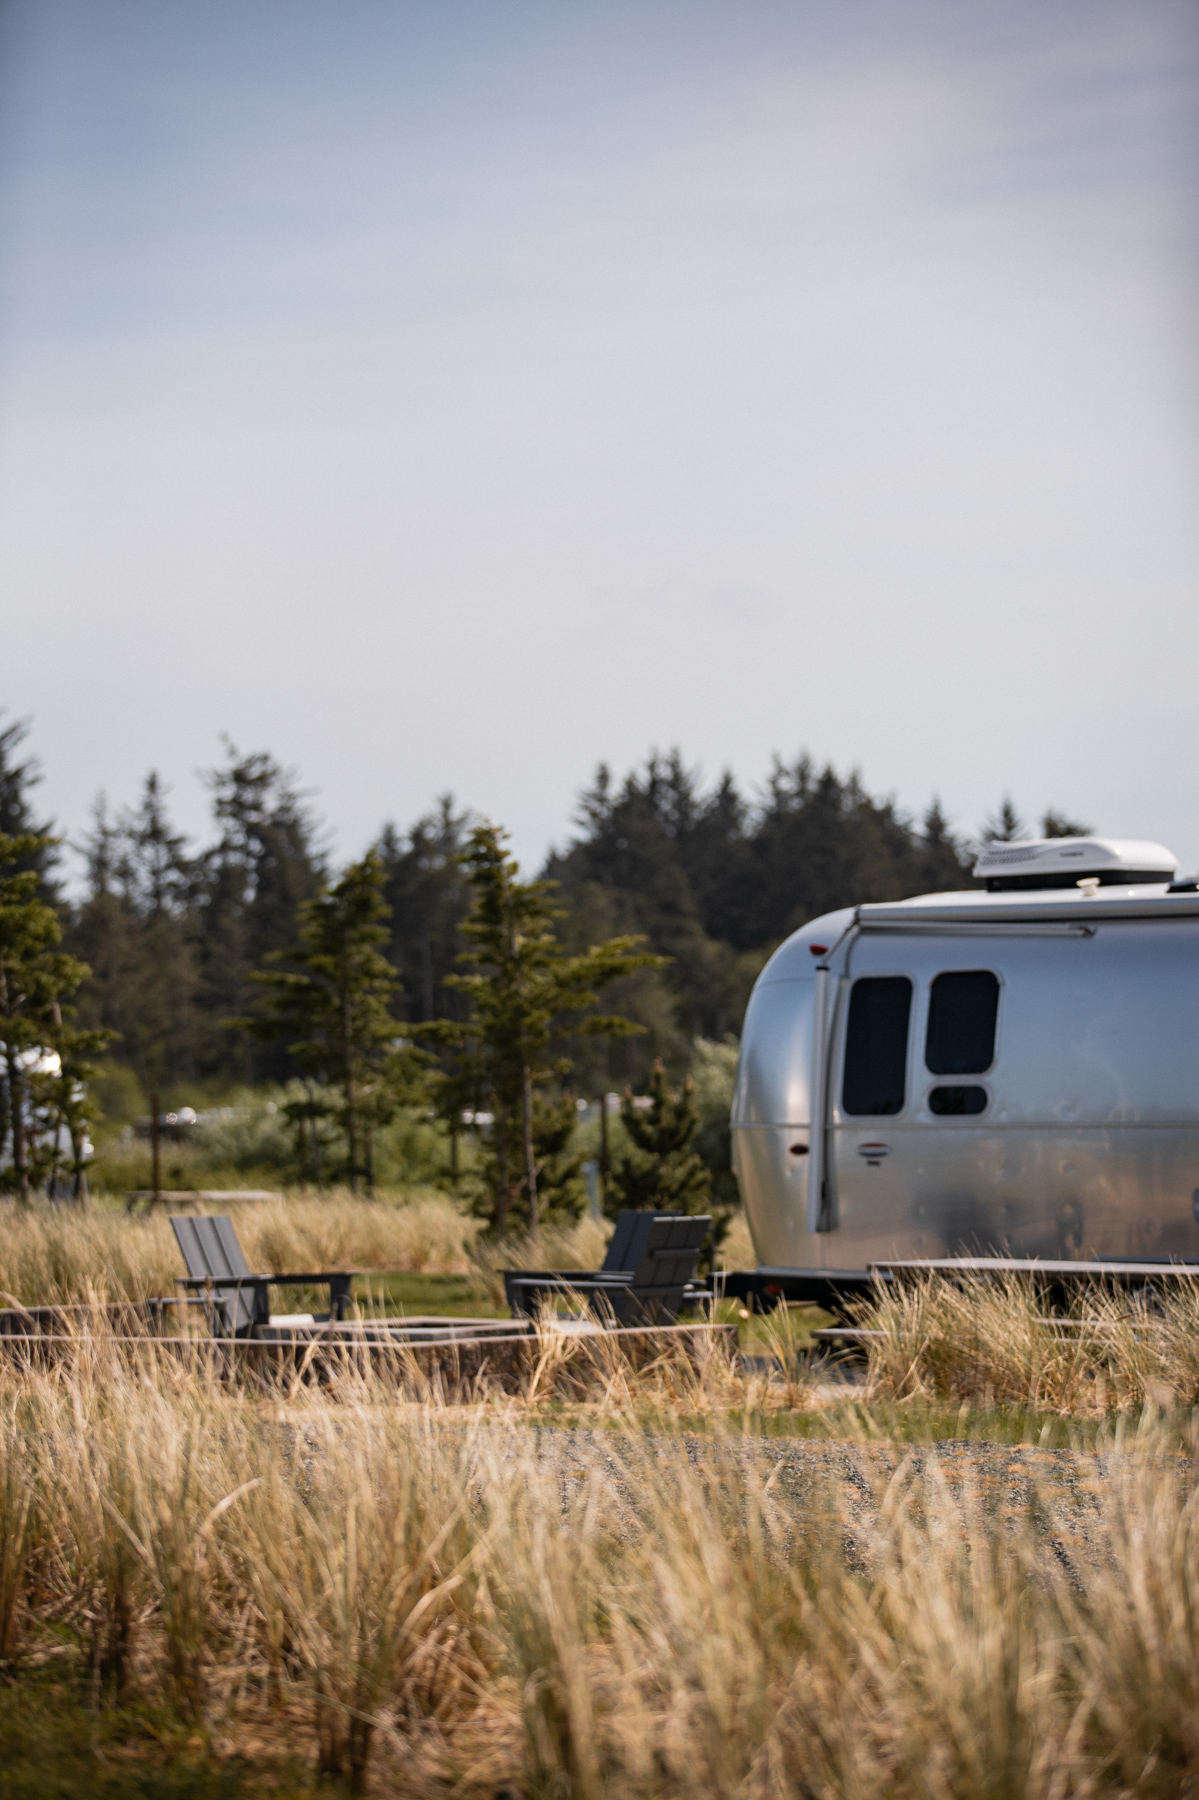 THE ALL-NEW AIRSTREAM OUTDOOR AREA